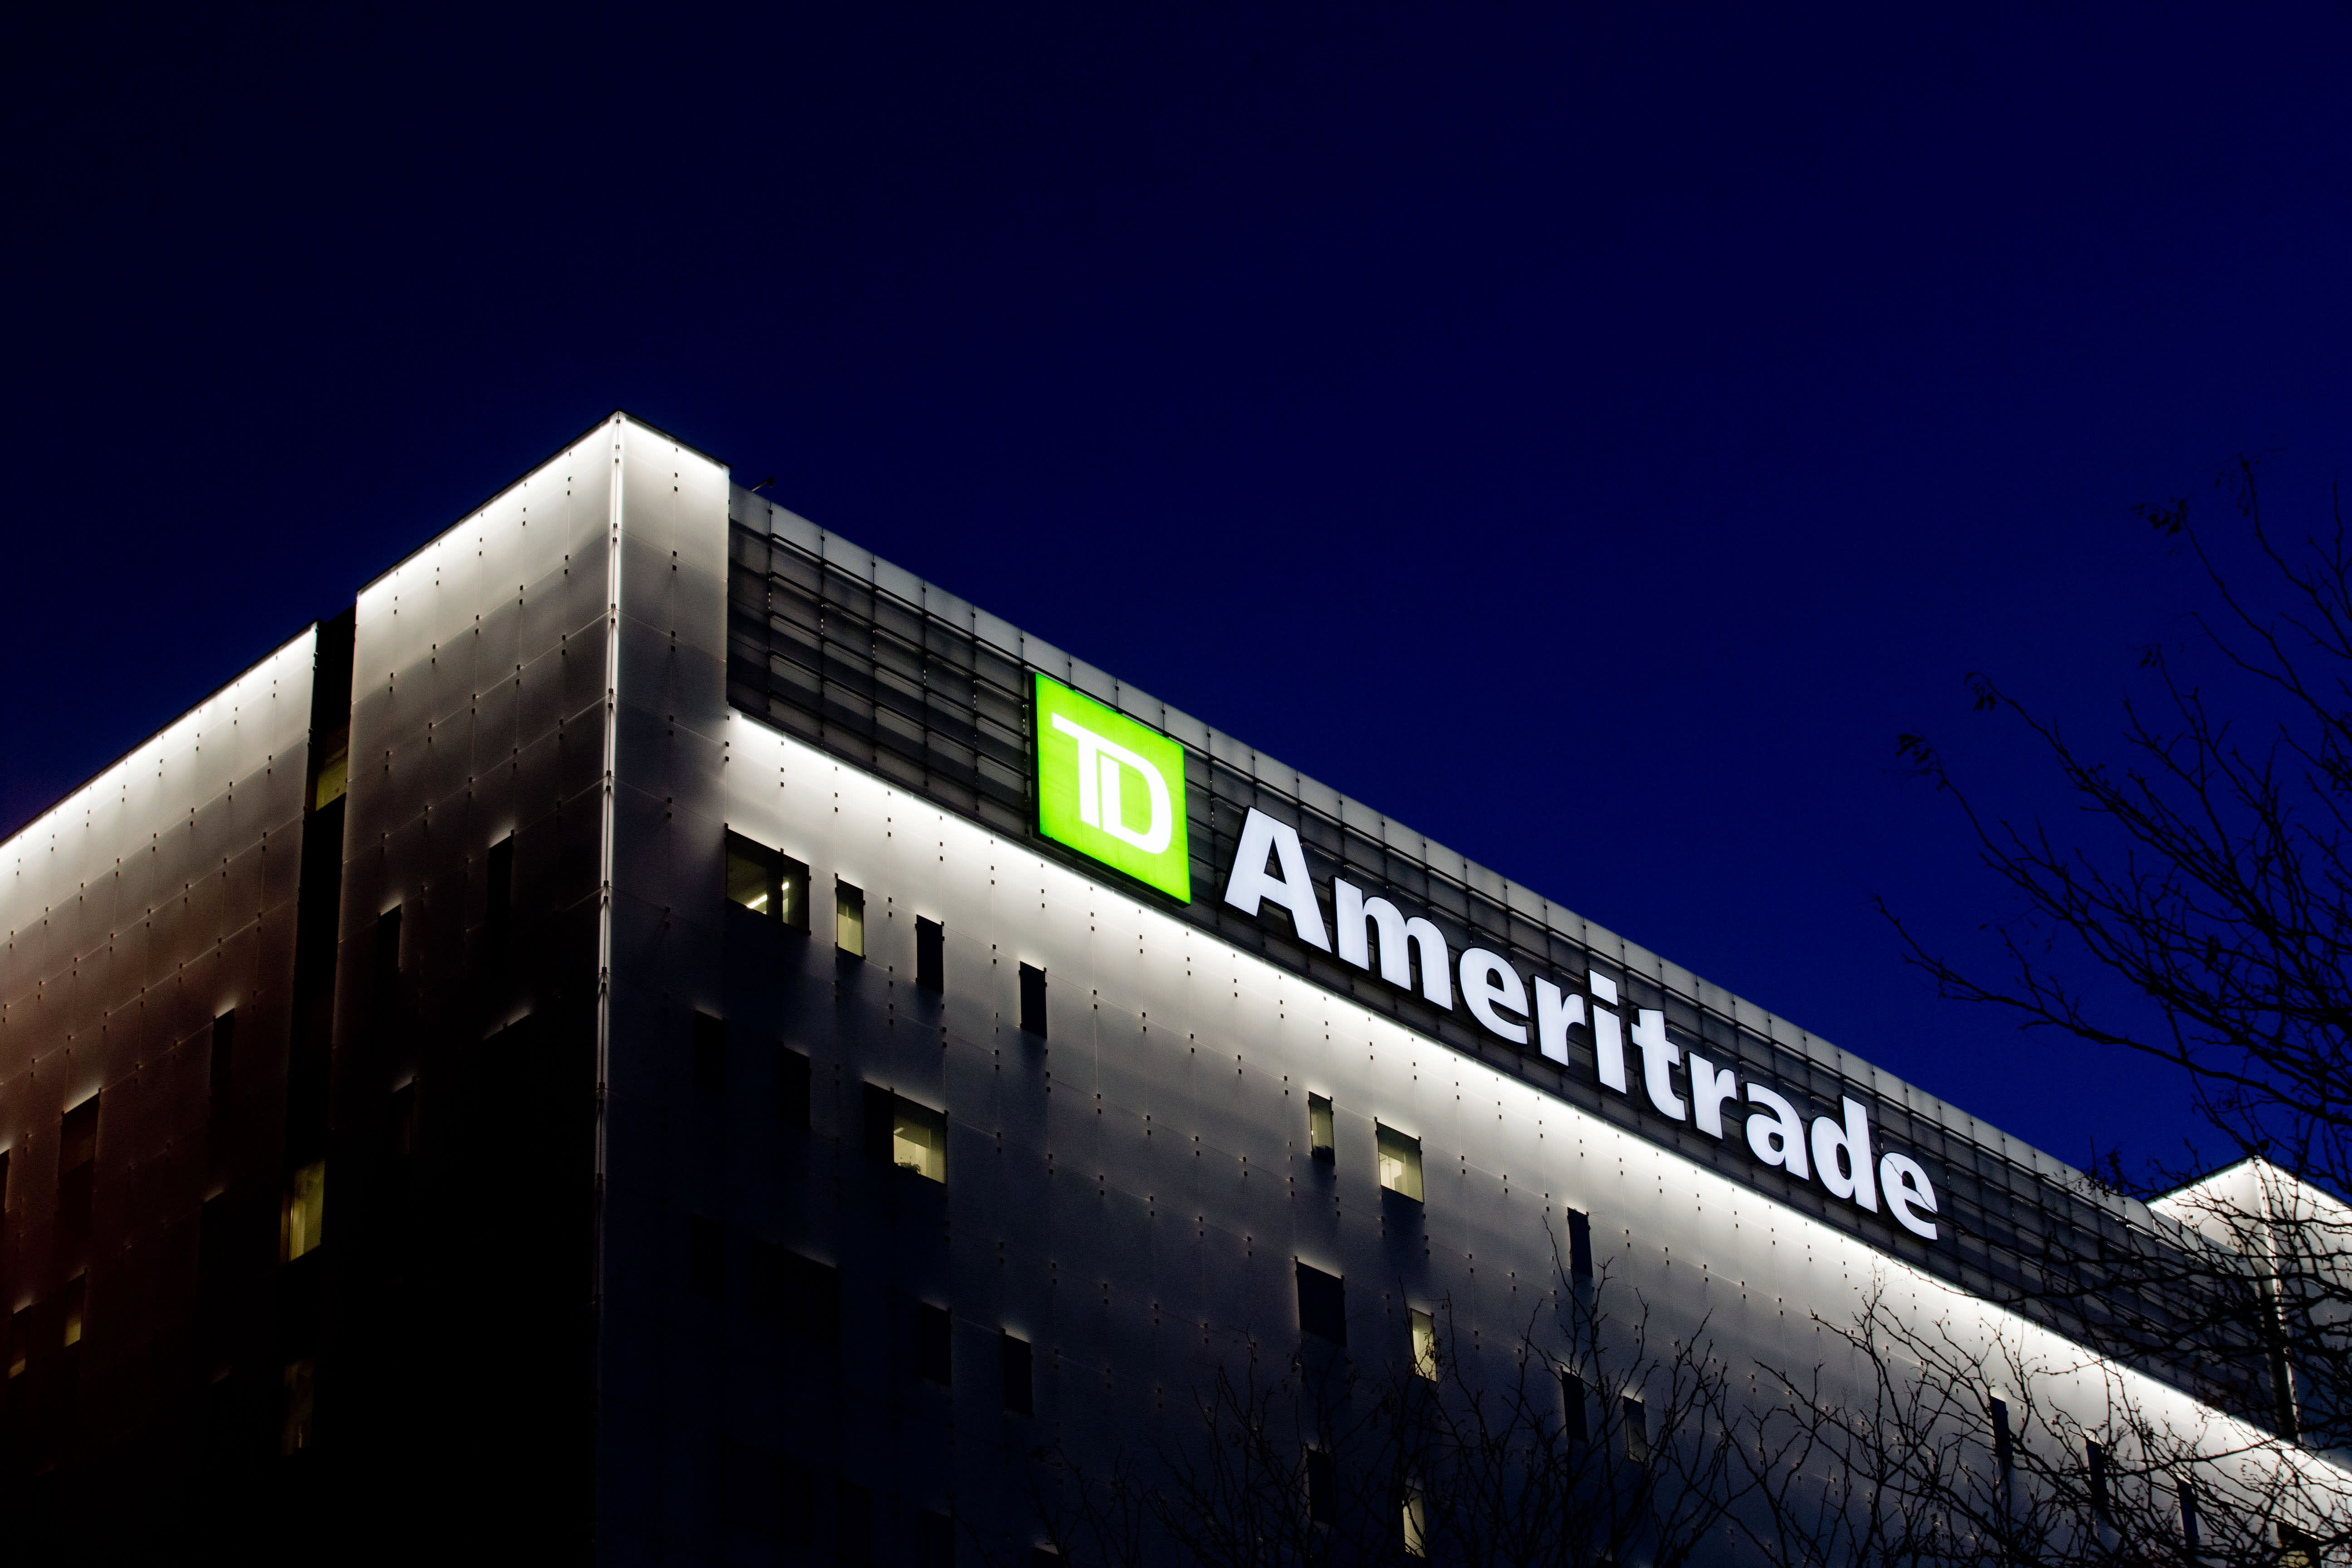 How Vanguard aims to prevail in fee wars, especially vs. Schwab-TD Ameritrade